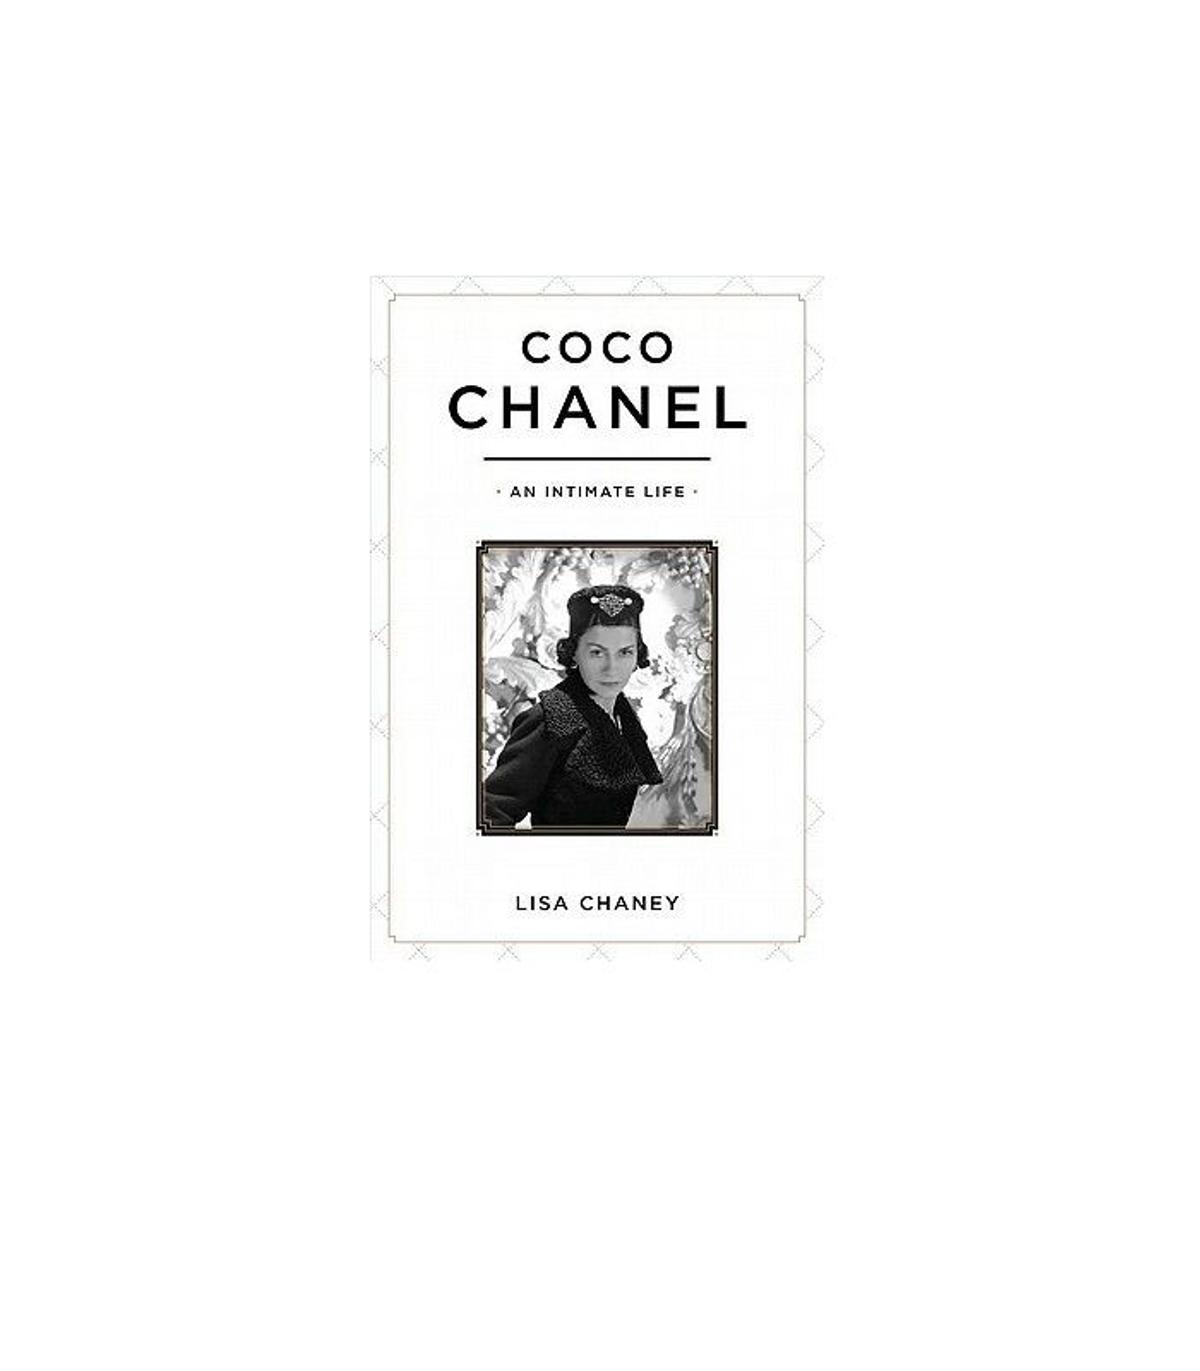 Coco Chanel: An intimate life, de Lisa Chaney